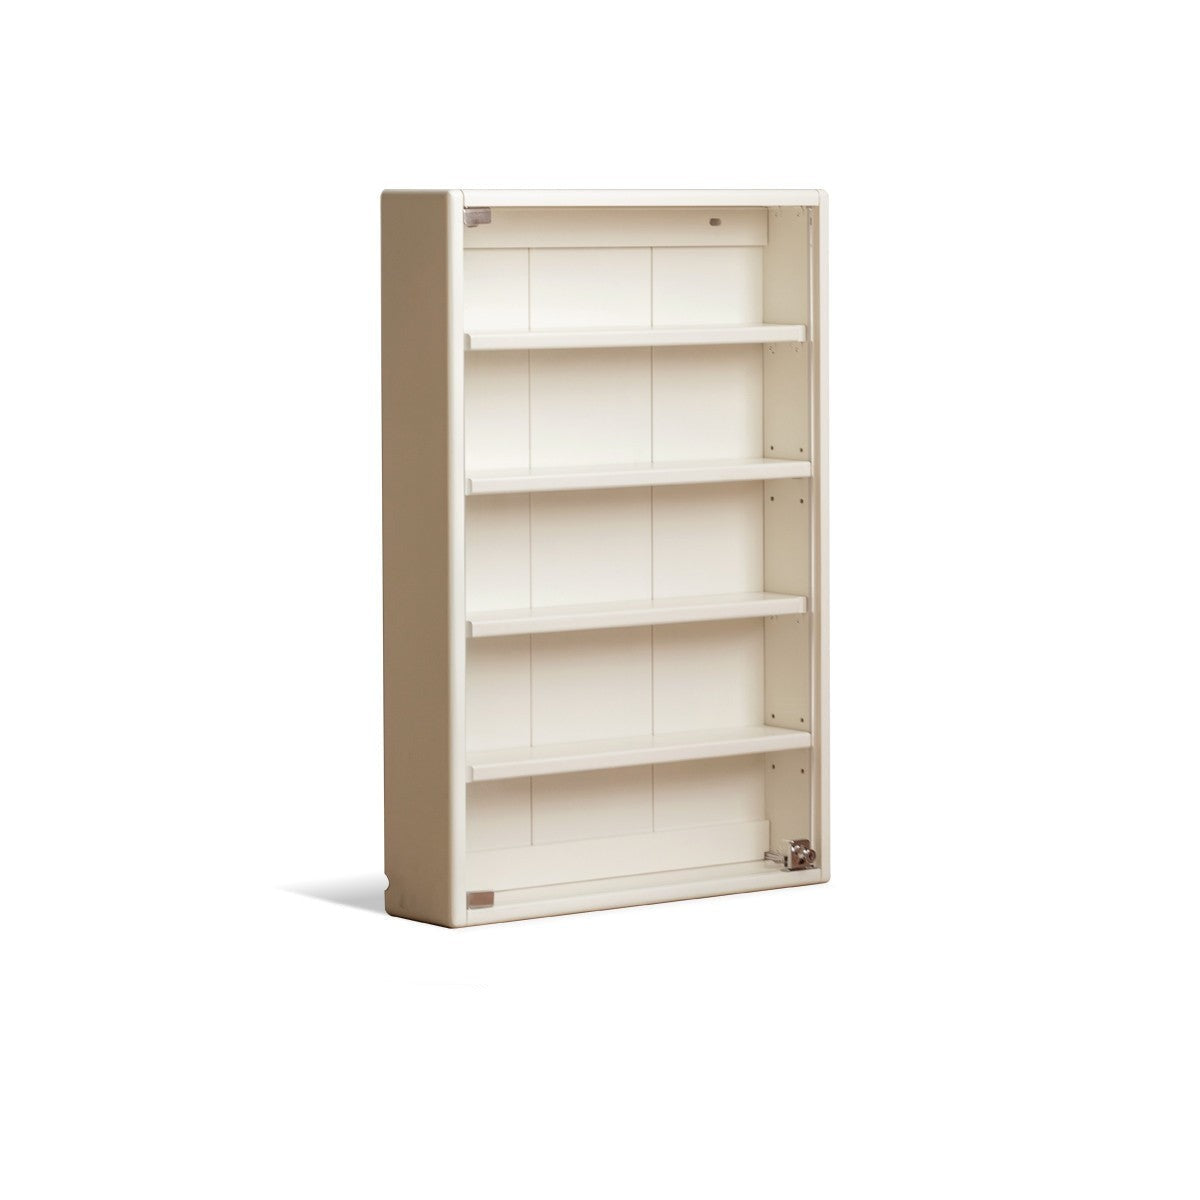 Poplar solid wood wall-mounted display cabinet Creamy Style ultra-thin "